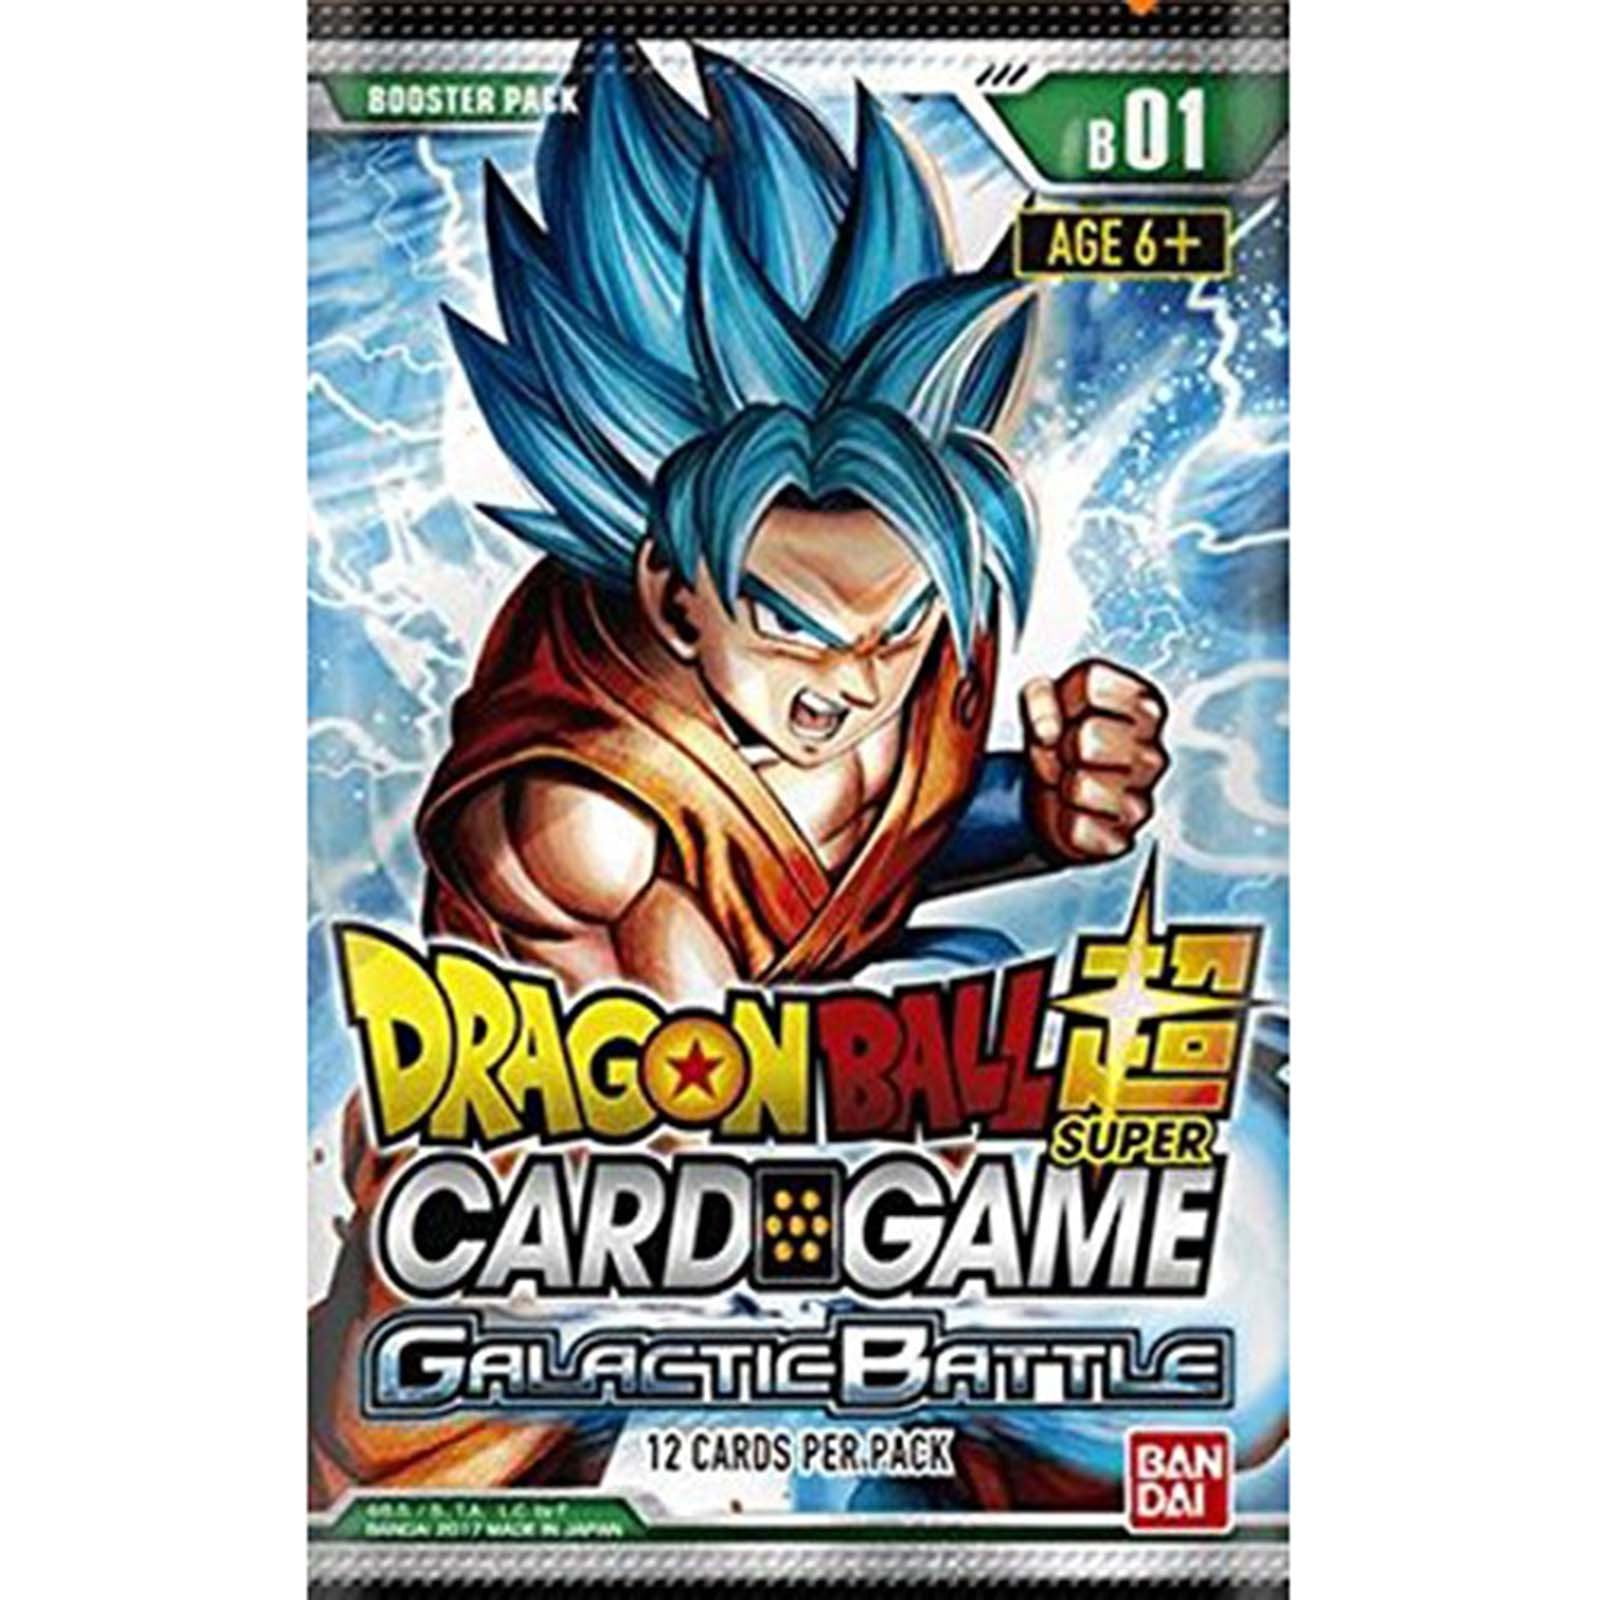 Bandai super card game collector pack 2018-dragon ball z-set of 5 boosters 